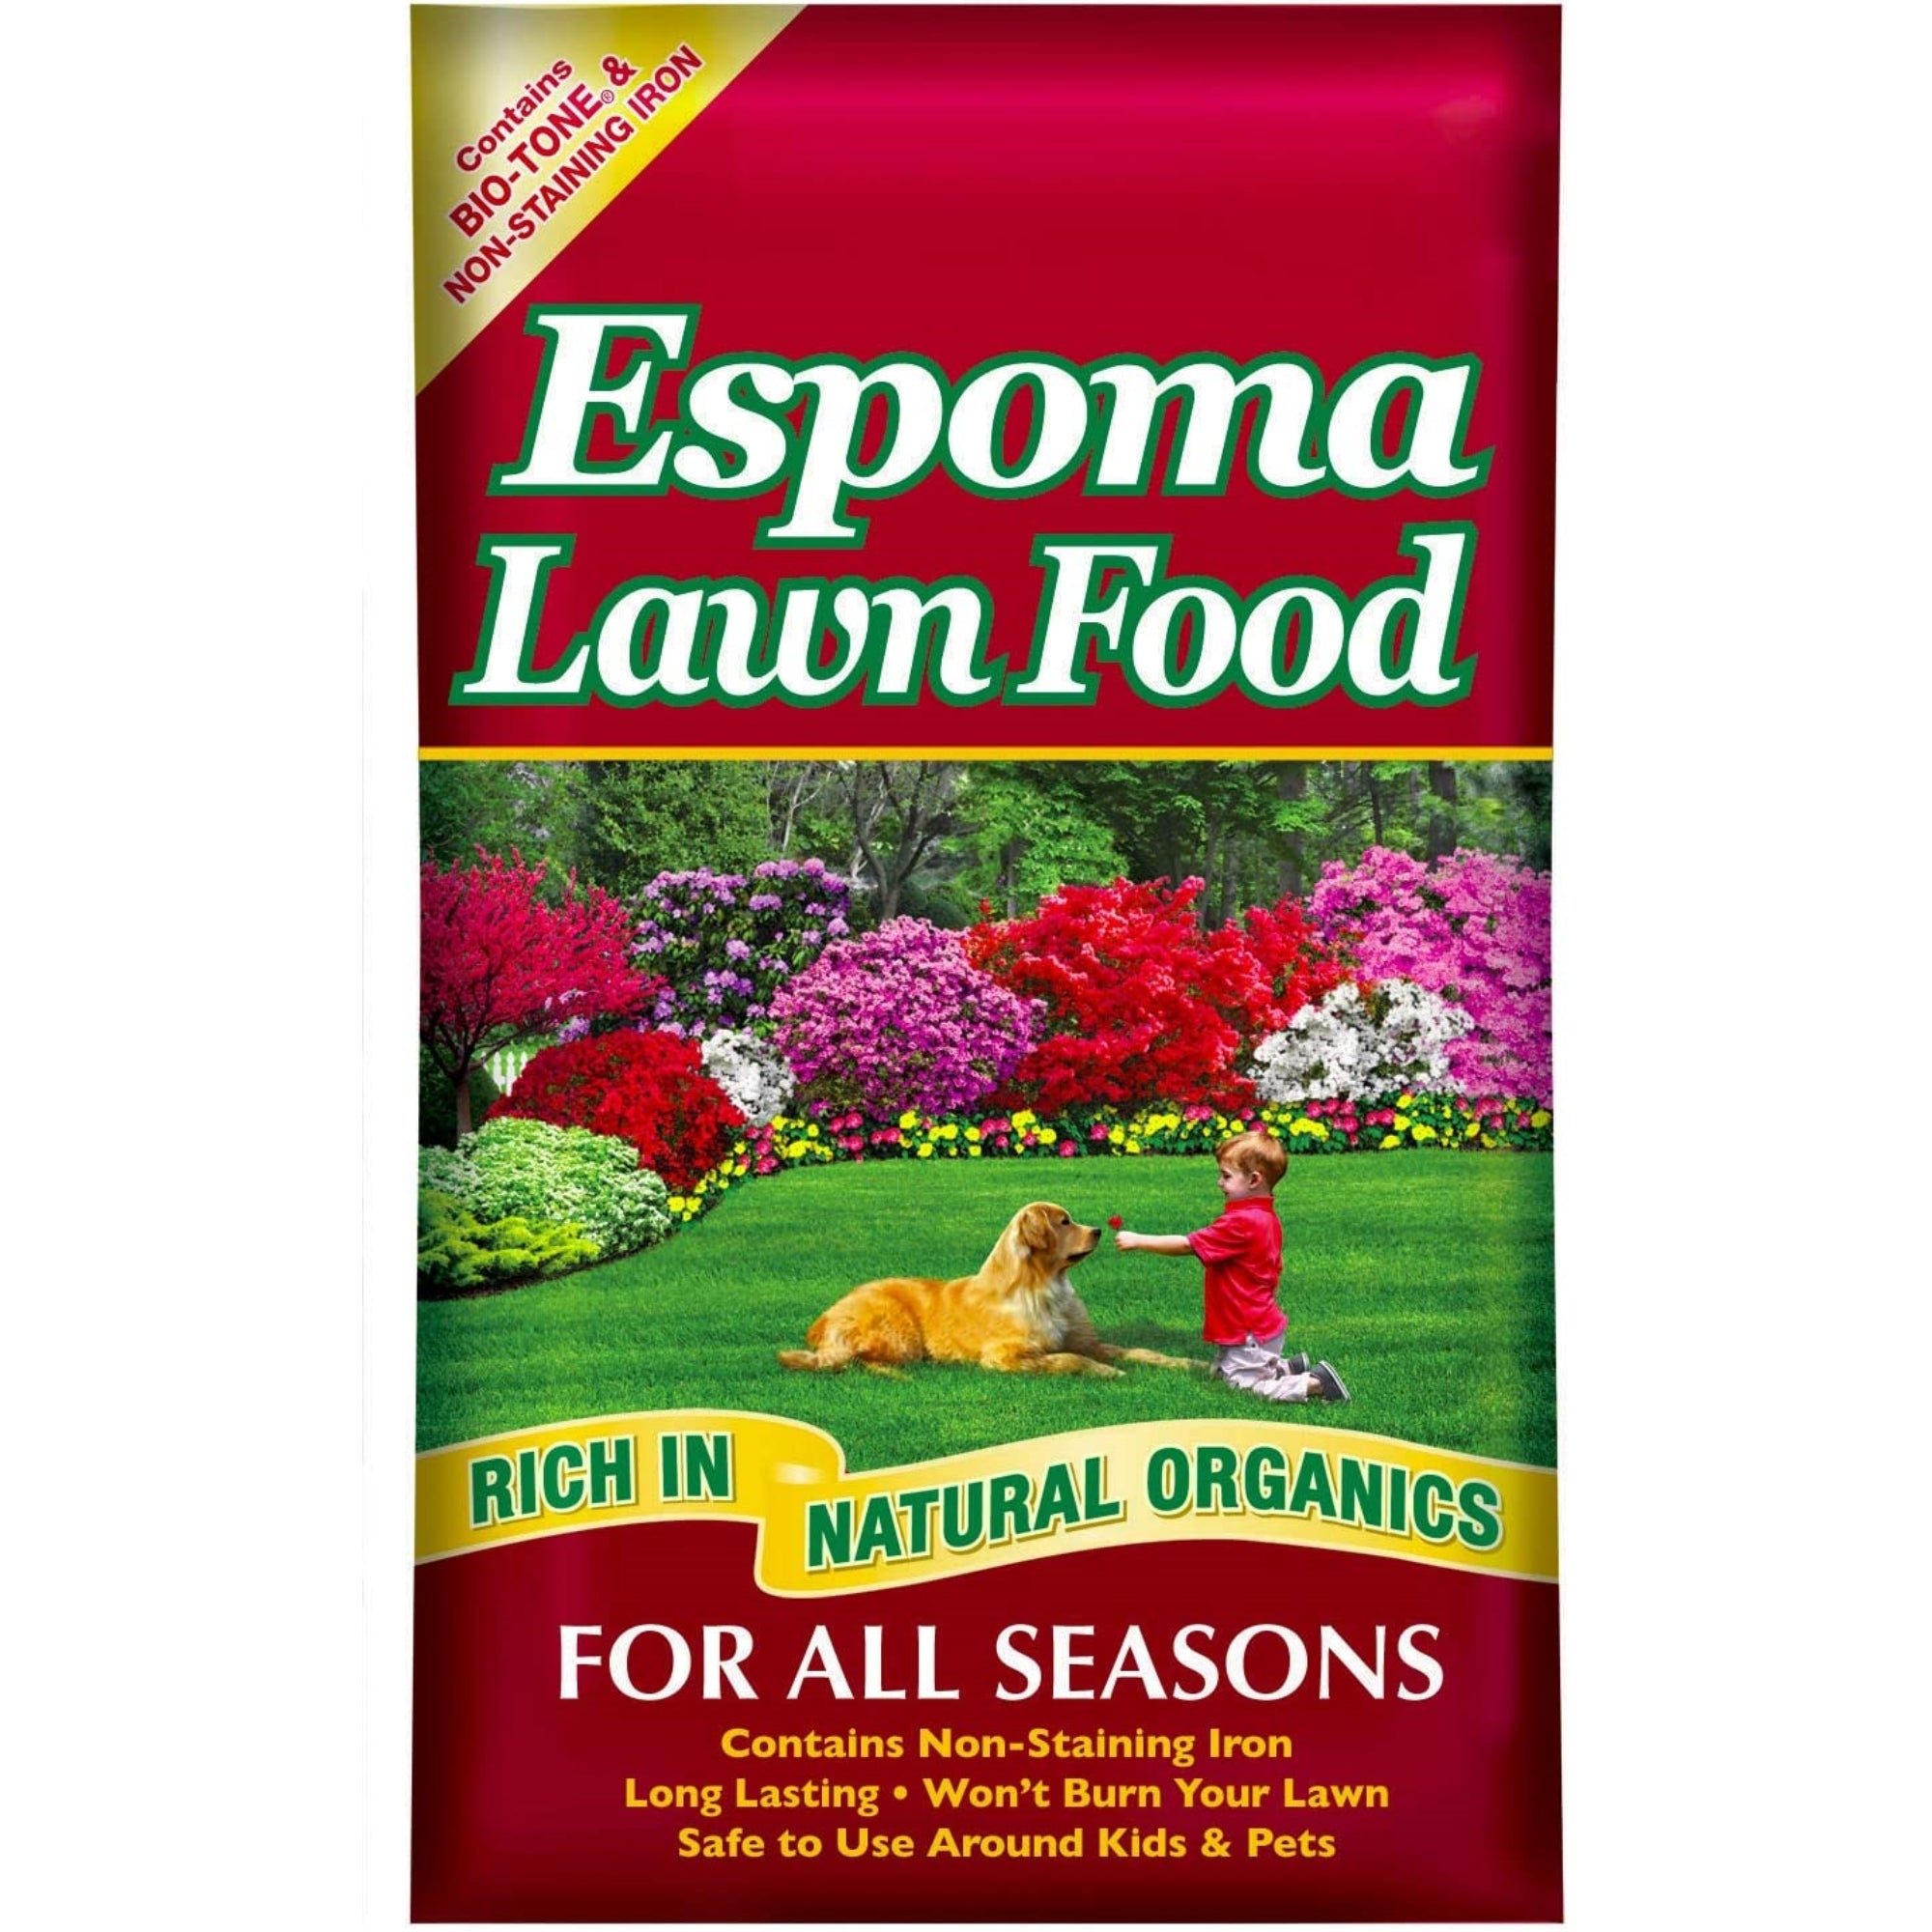 Espoma 15-0-5 Lawn Food, Rich in Natural Organics, for All Seasons, Contains Bio-tone & Non-Staining Iron, Safe to Use Around Kids & Pets